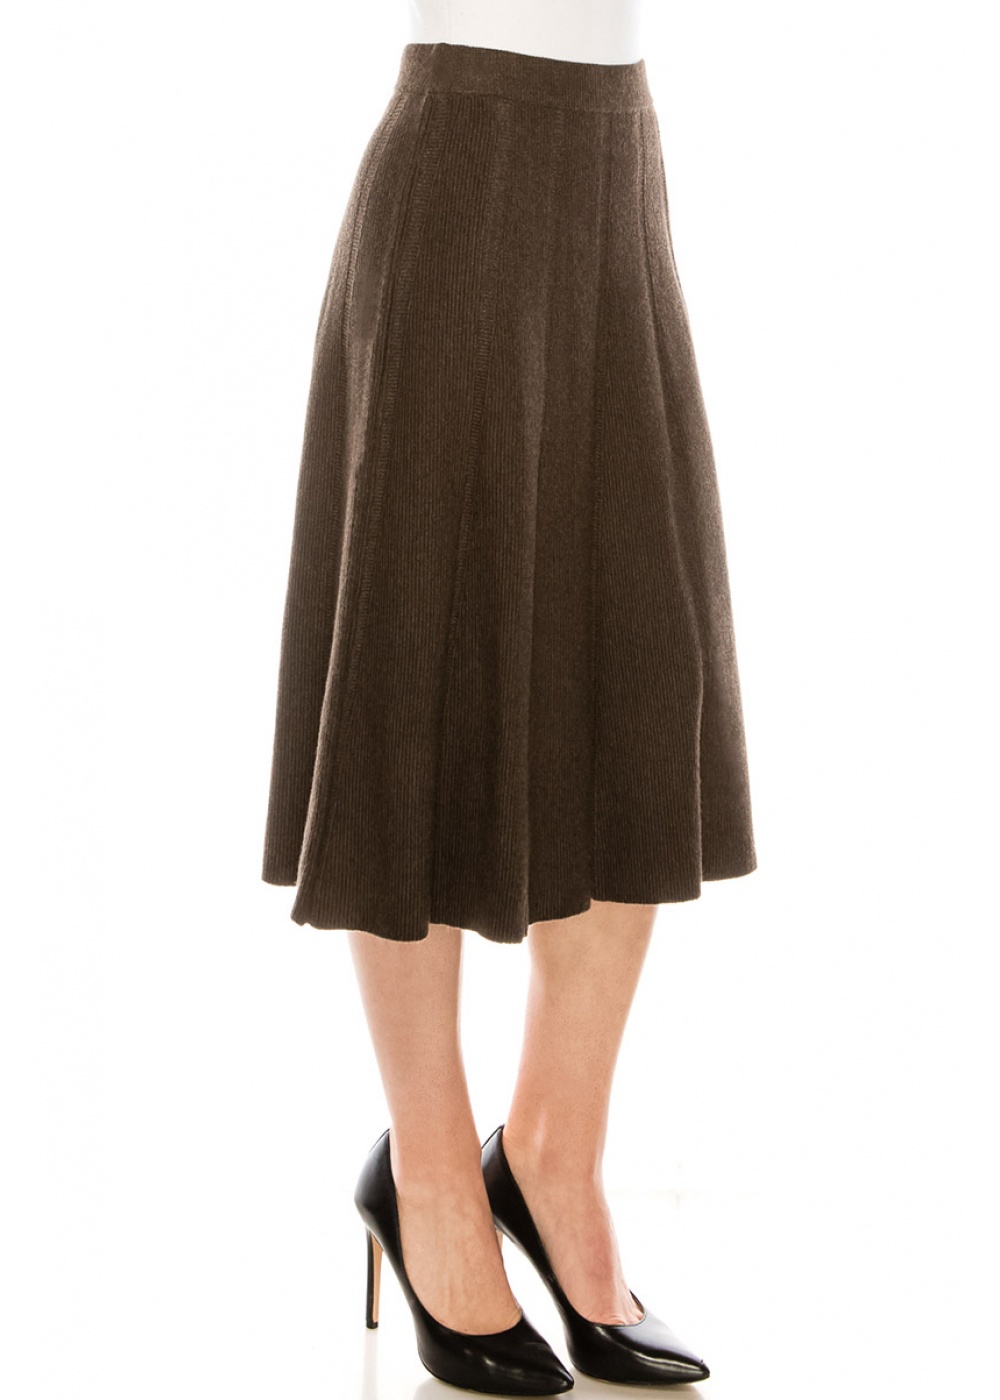 Knit pleated skirt in brown